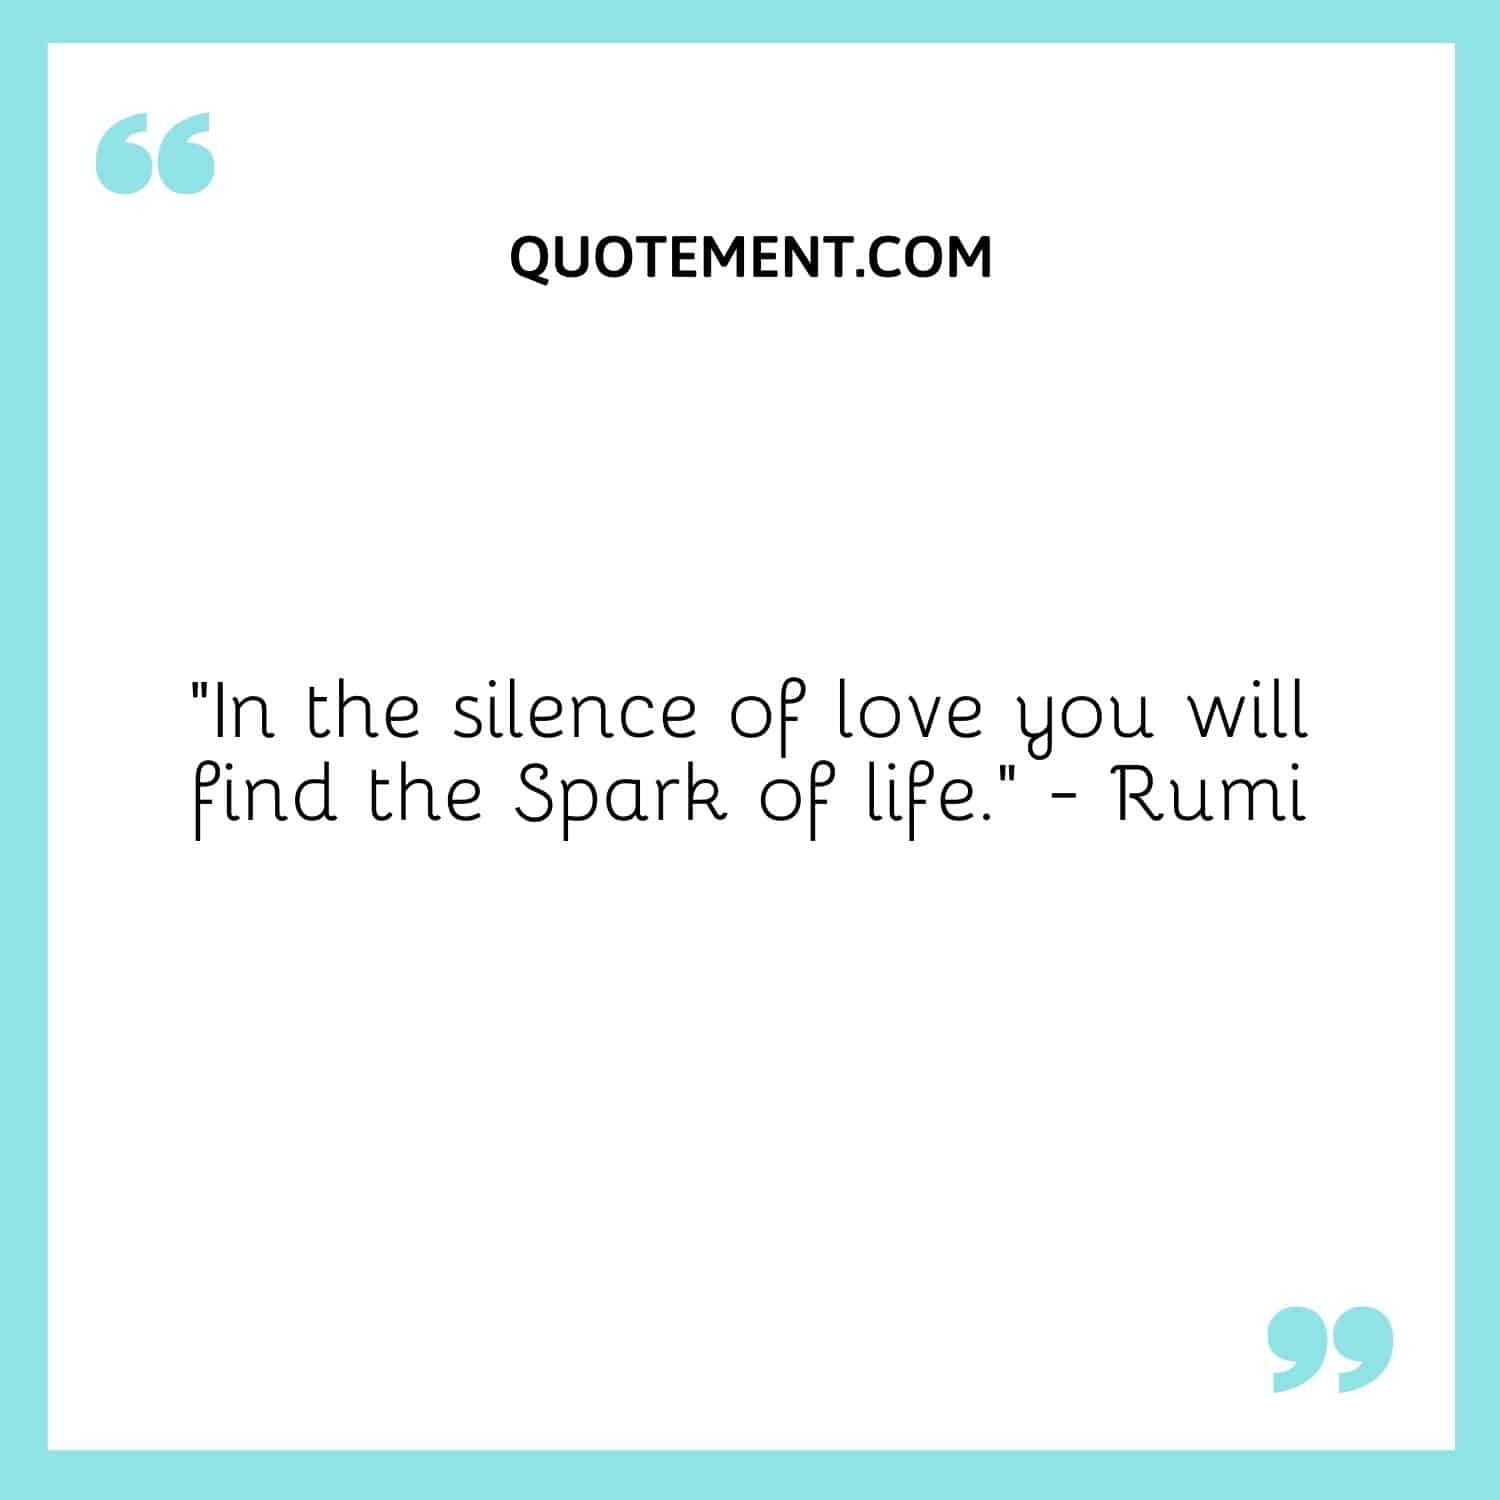 “In the silence of love you will find the Spark of life.” — Rumi